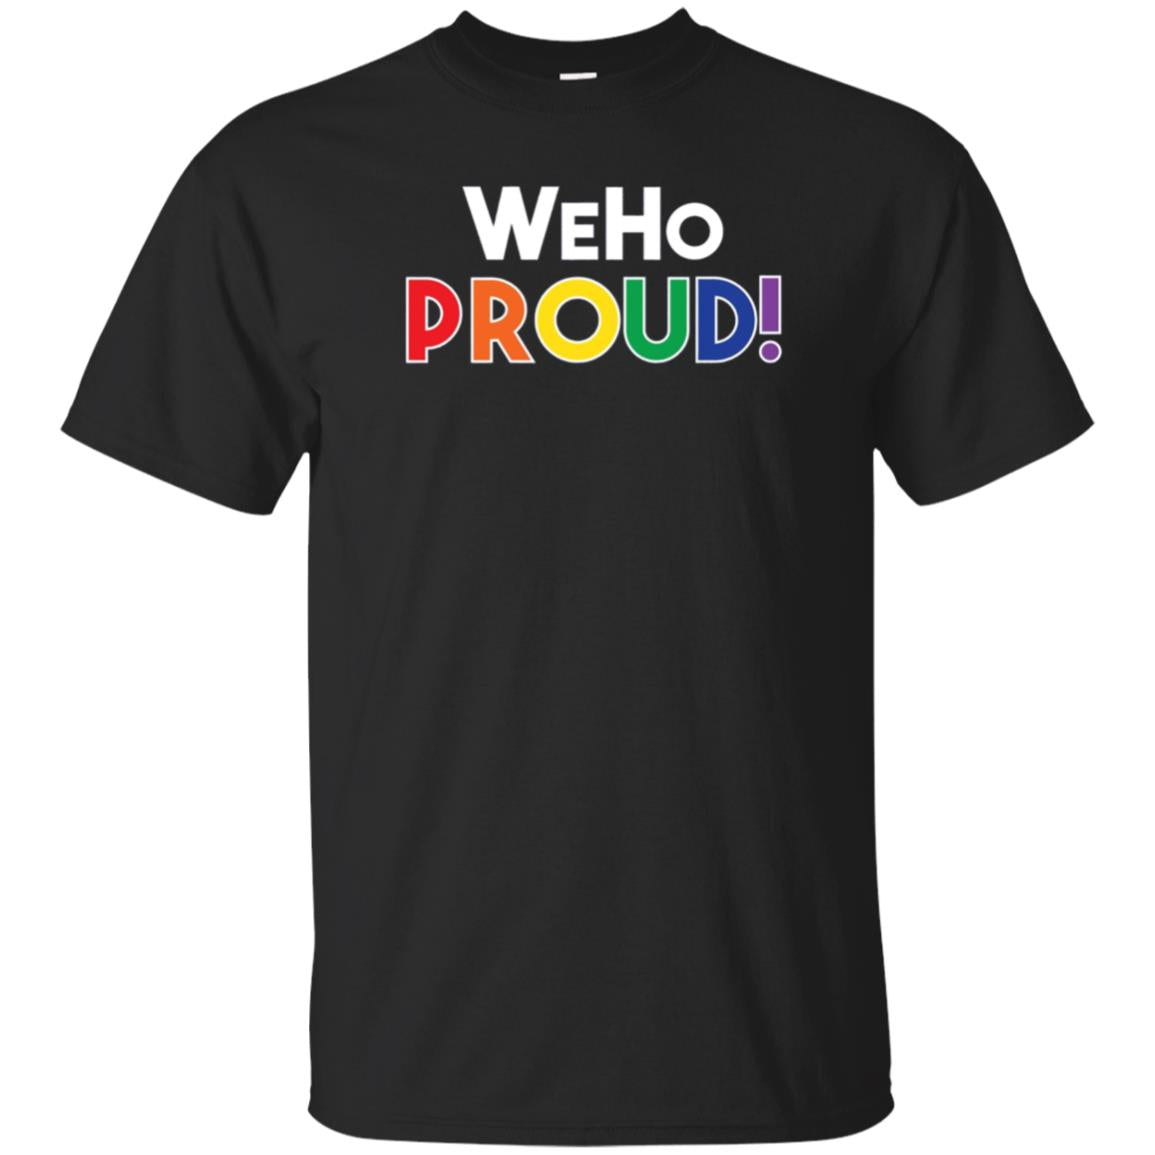 Weho Proud Lgbt Gay Pride T-shirt West Hollywood California